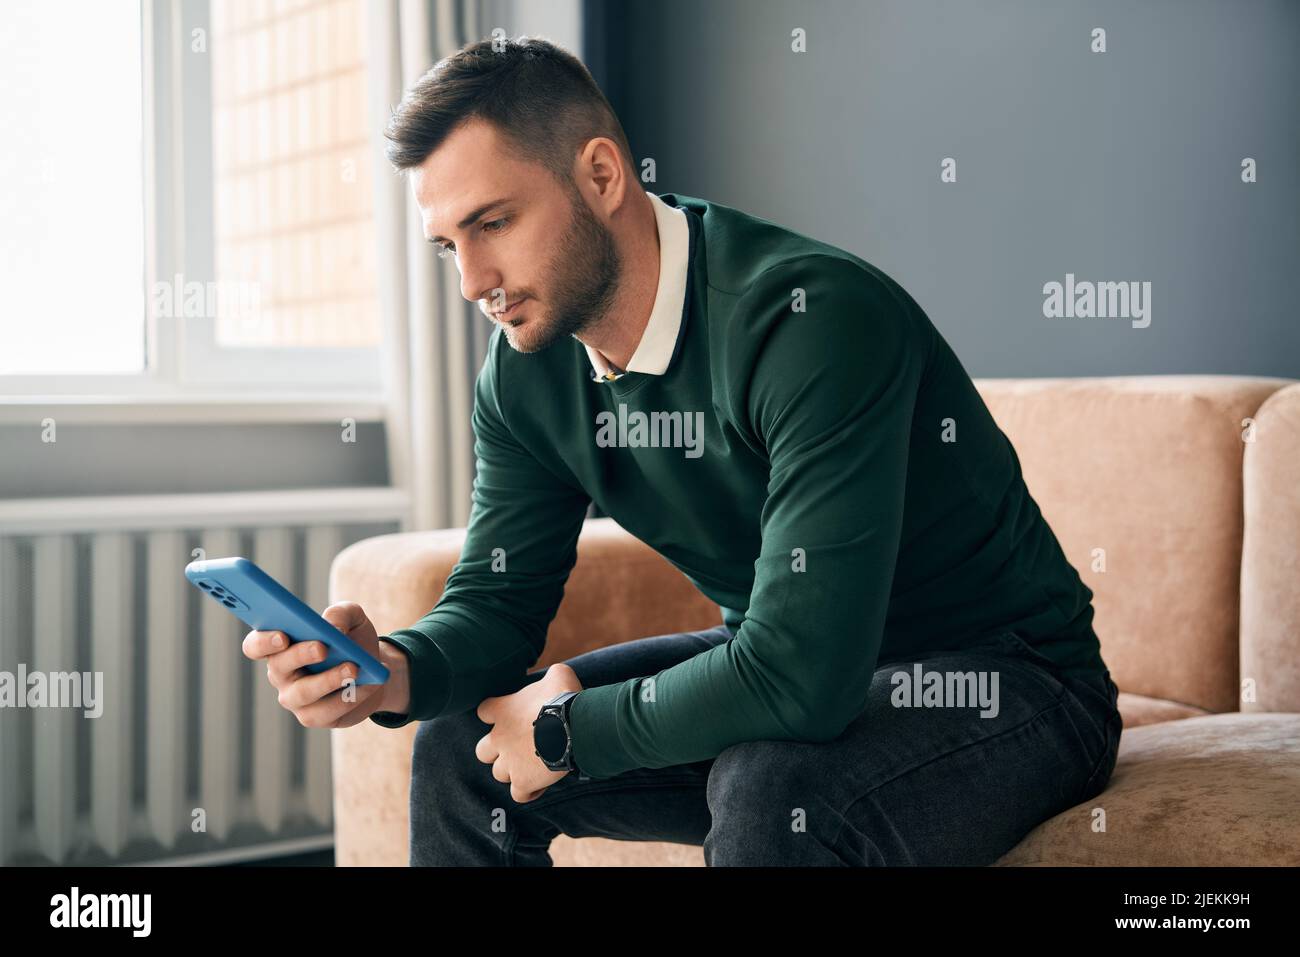 Relaxed man sitting on couch using hsi mobile smart phone at home. Social media concept Stock Photo